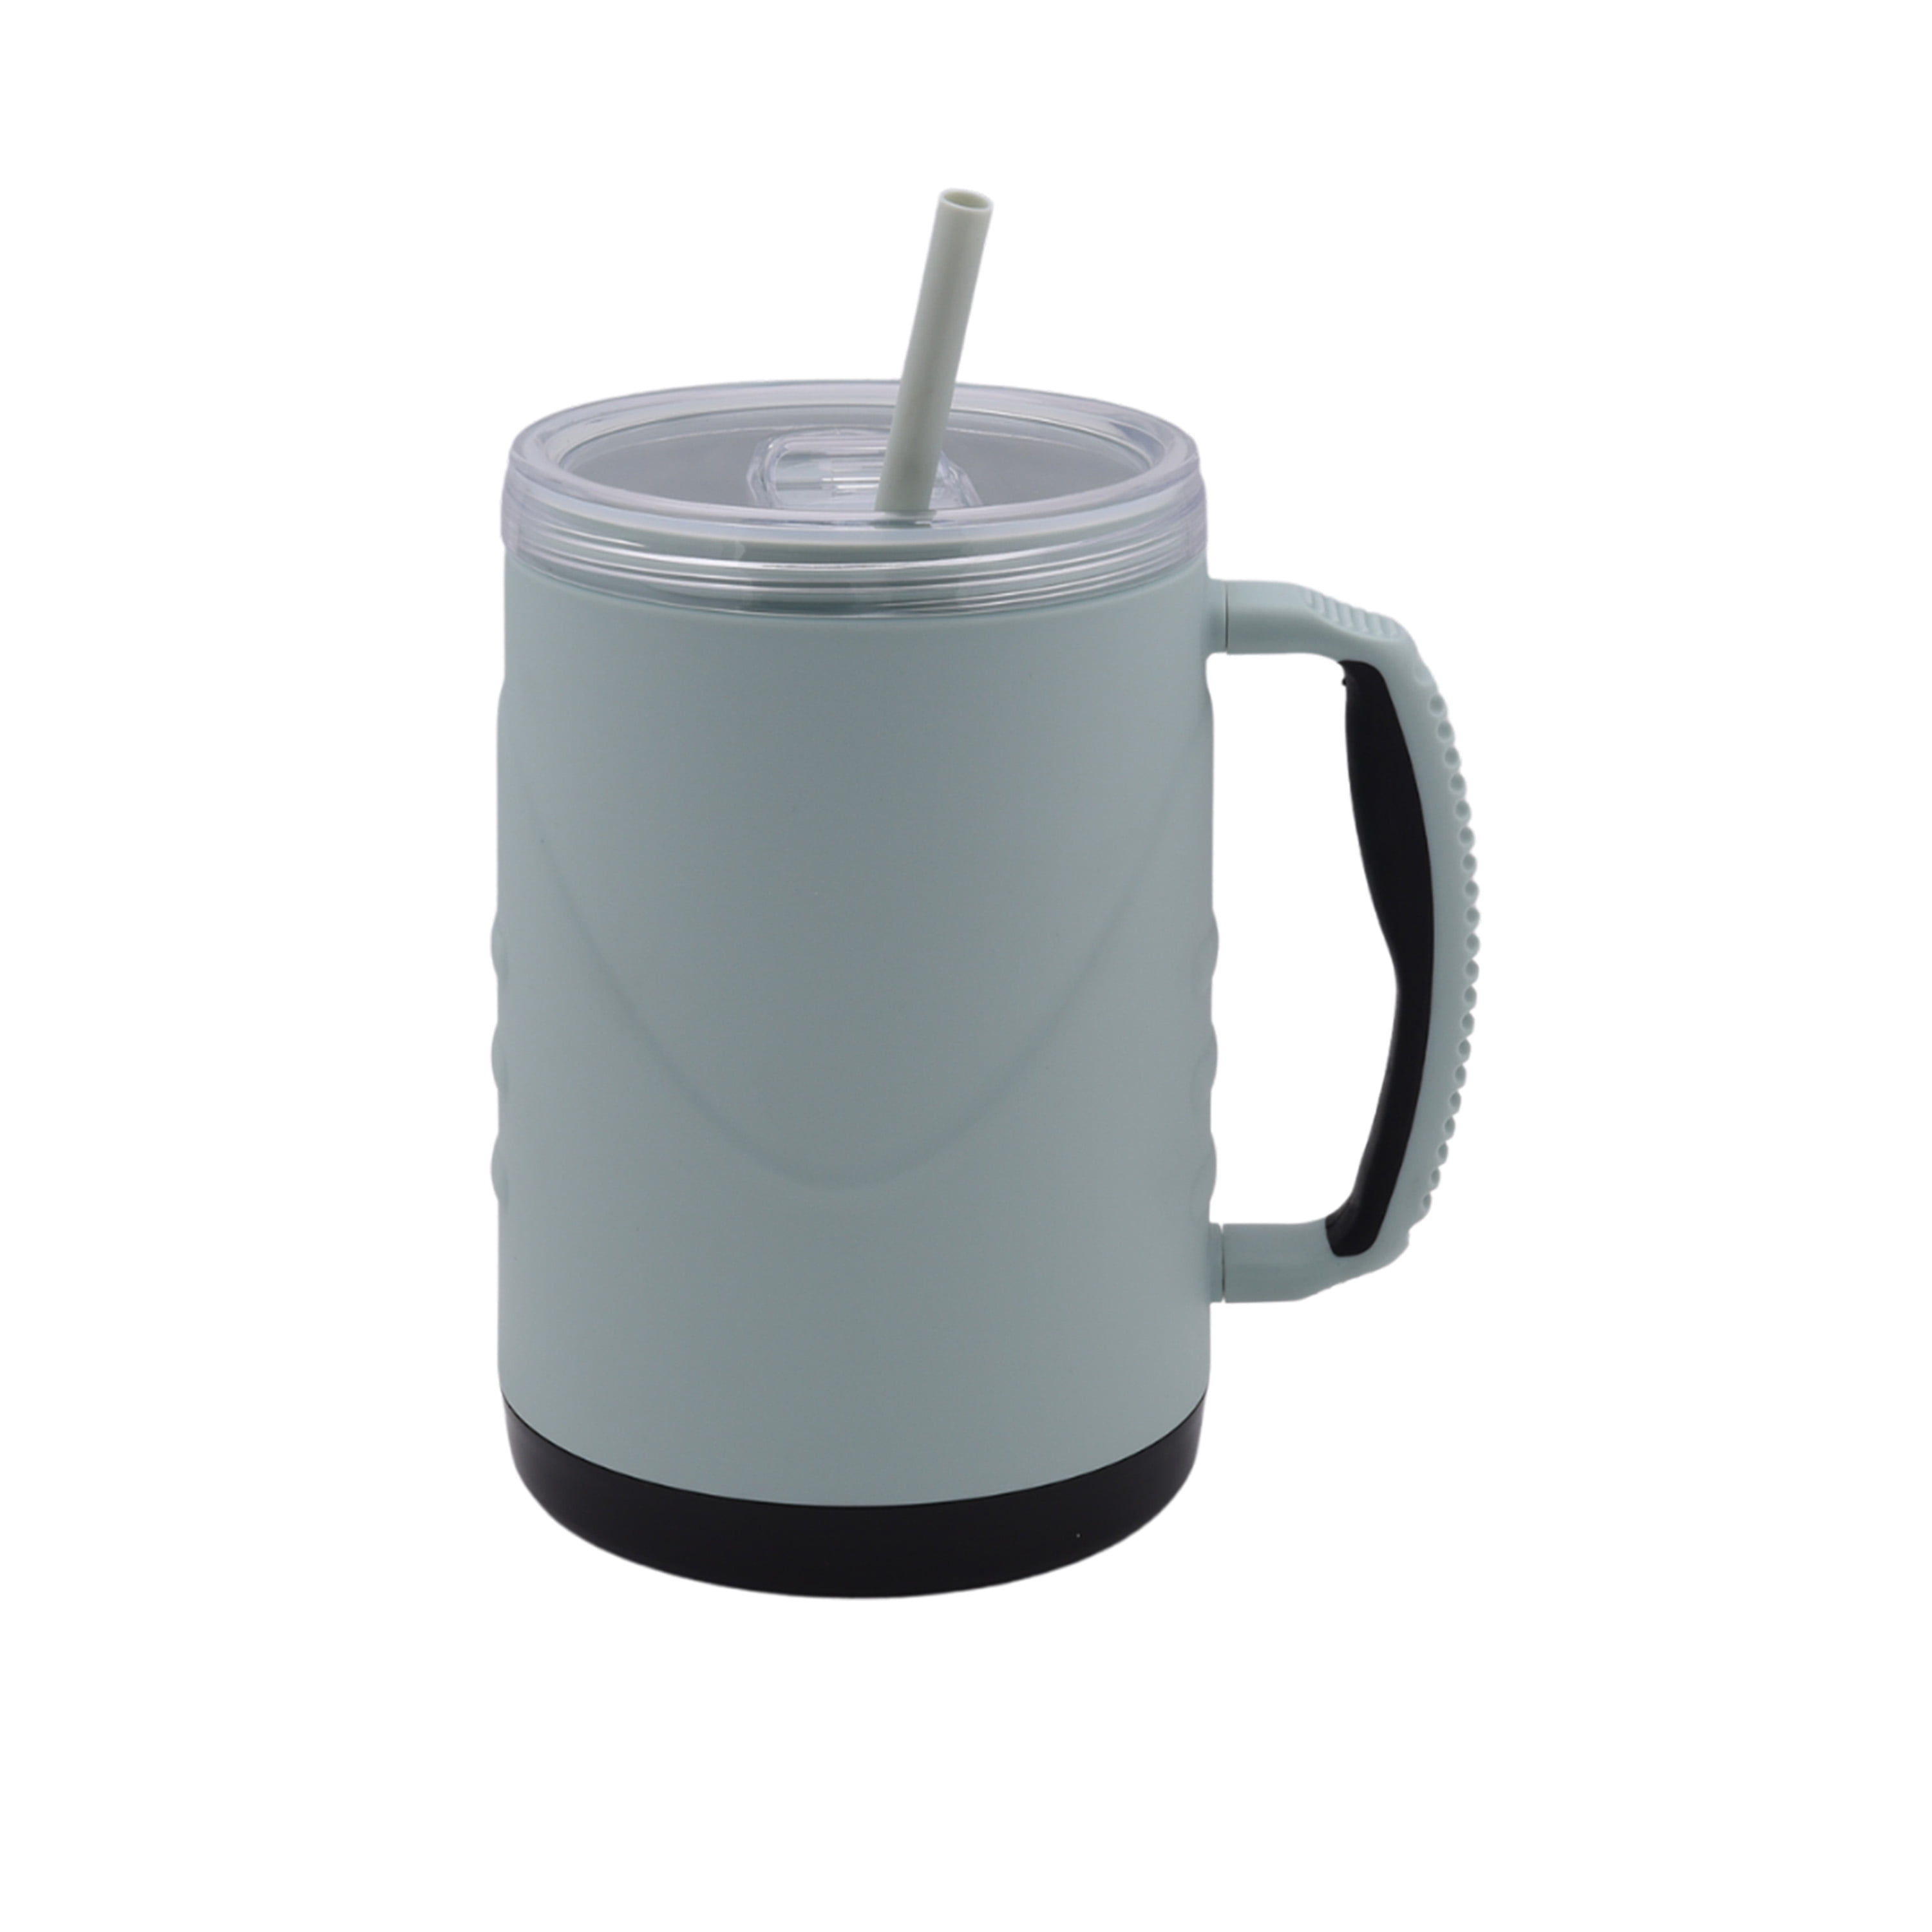 Mainstays 48-Ounce Eco-Friendly Plastic Mug with Lid, Mint Green